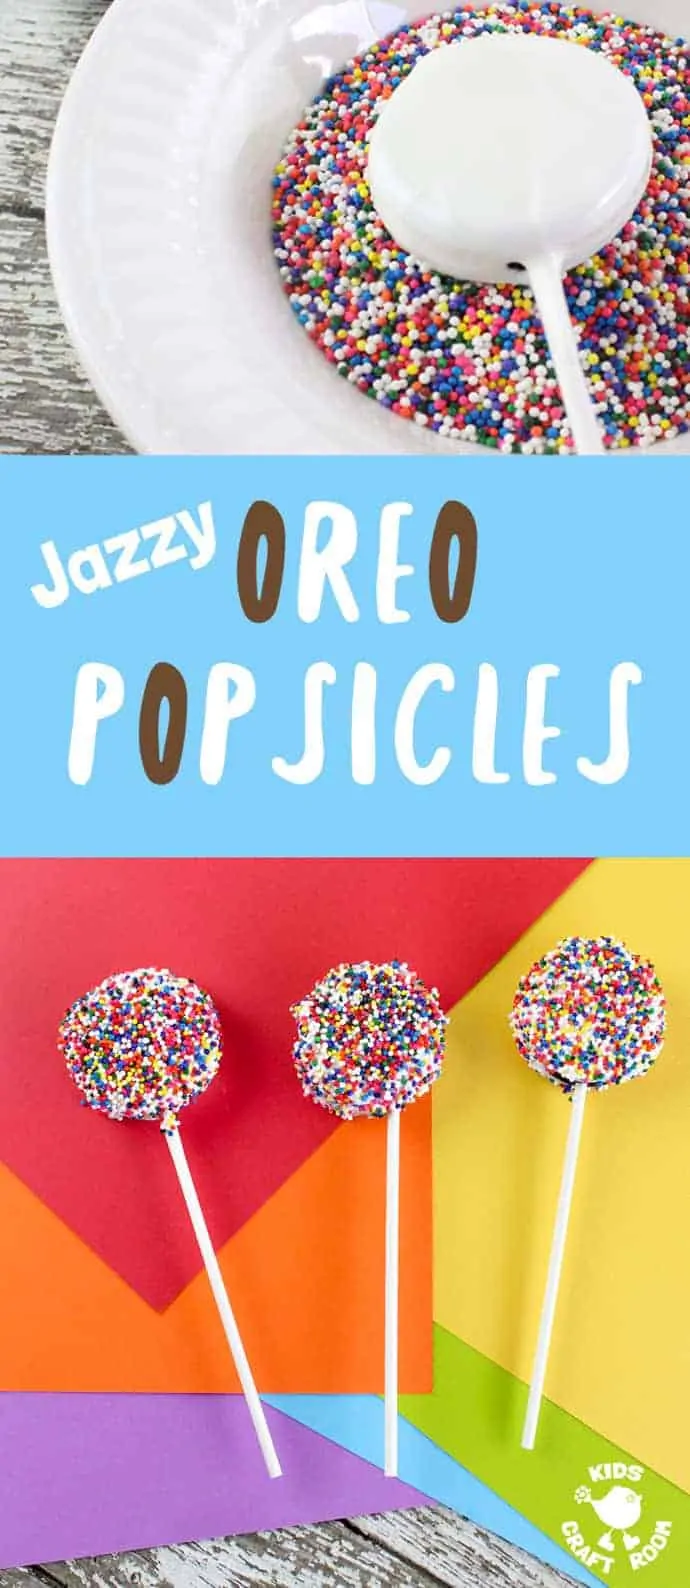 JAZZY OREO POPSICLES are FUN! A perfect recipe for cooking with kids. Sweet, decadent, easy to make and great for sharing with friends, JAZZY OREO POPS are delicious for play dates, parties and picnics. #cookingwithkids #kidsrecipes #oreos #oreorecipes #popsicles #homemadepopsicles #popsiclerecipes #kidsinthekitchen #desserts #homemadetreats #kidscraftroom